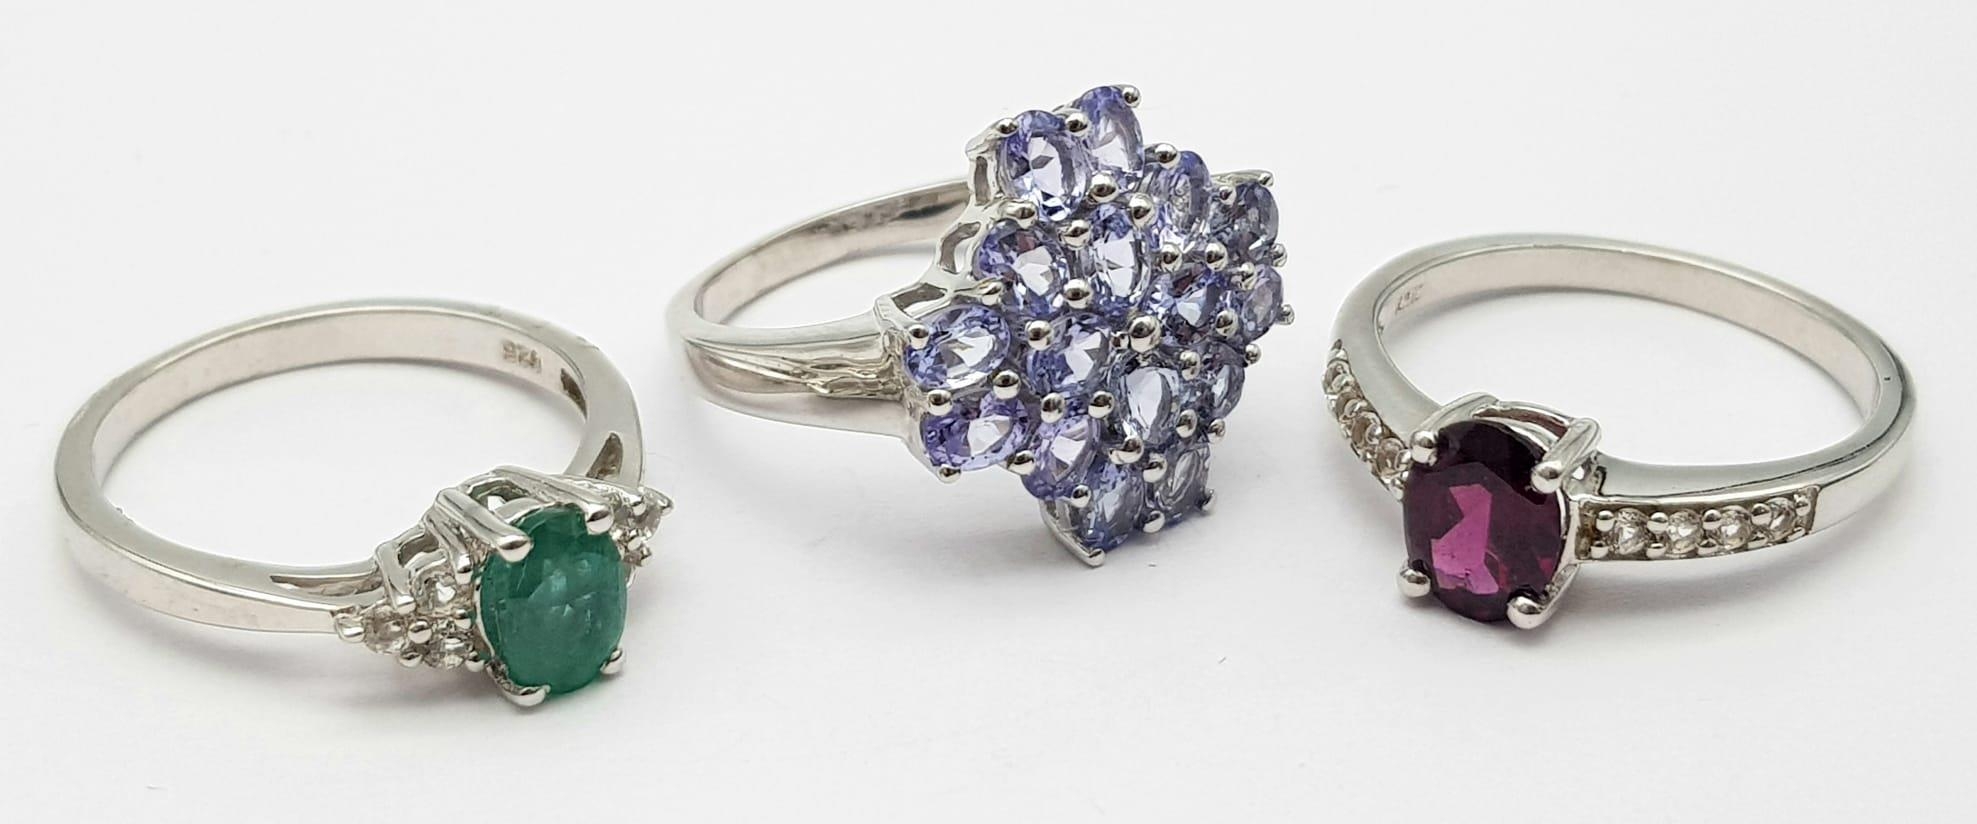 Three 925 Sterling Silver Gemstone Rings: Garnet - Size R, Amethyst - Size P and Emerald - Size P. - Image 2 of 13